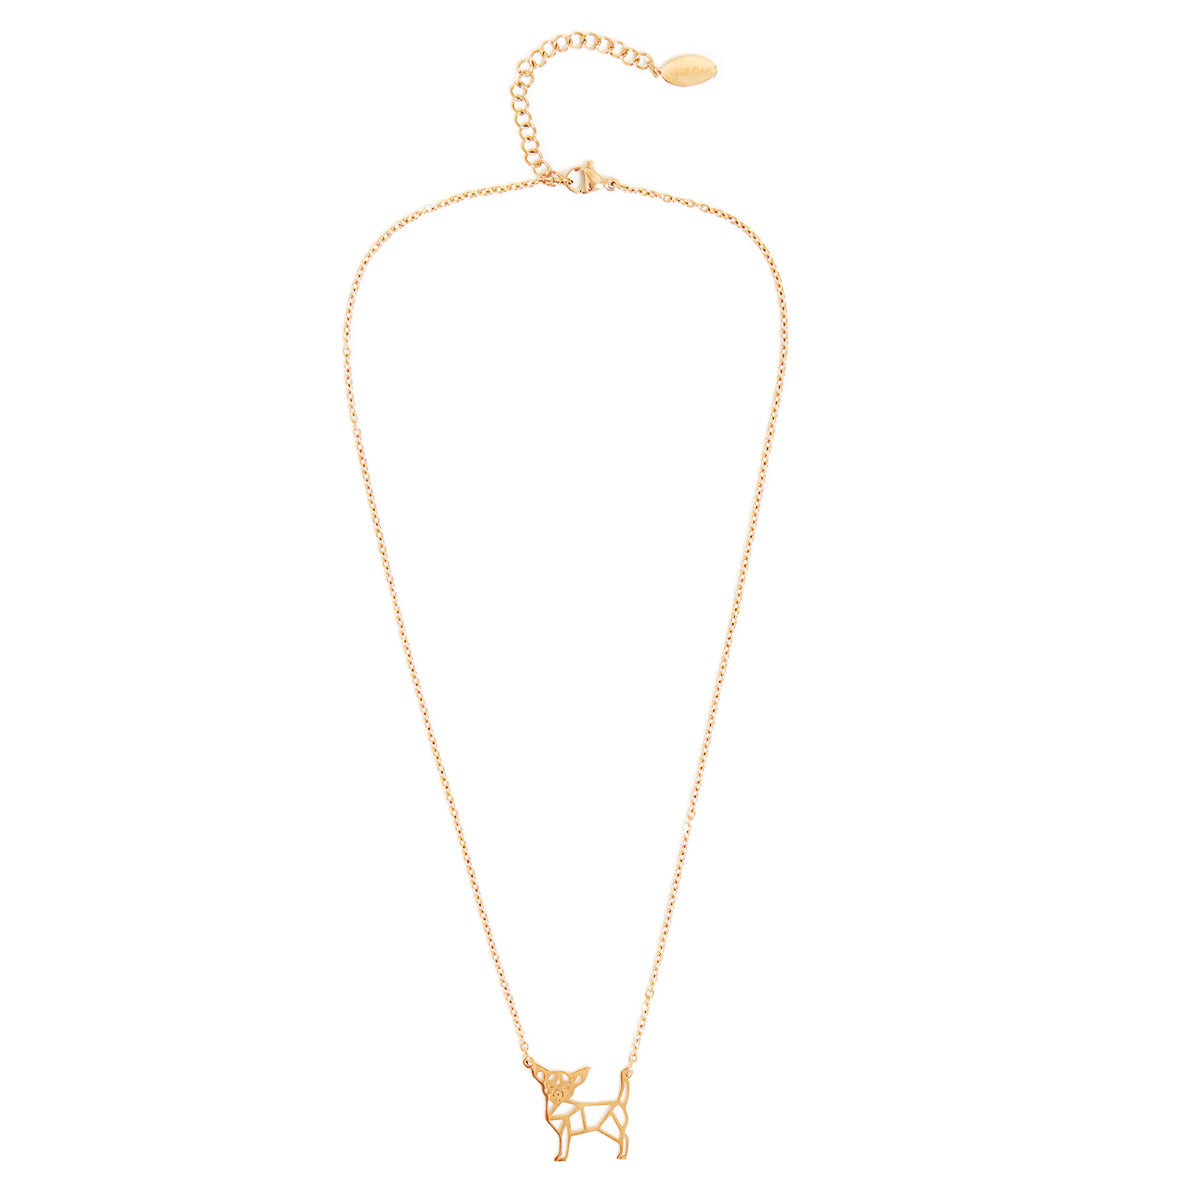 Chihuahua Dog Geometric Necklace Rose Gold